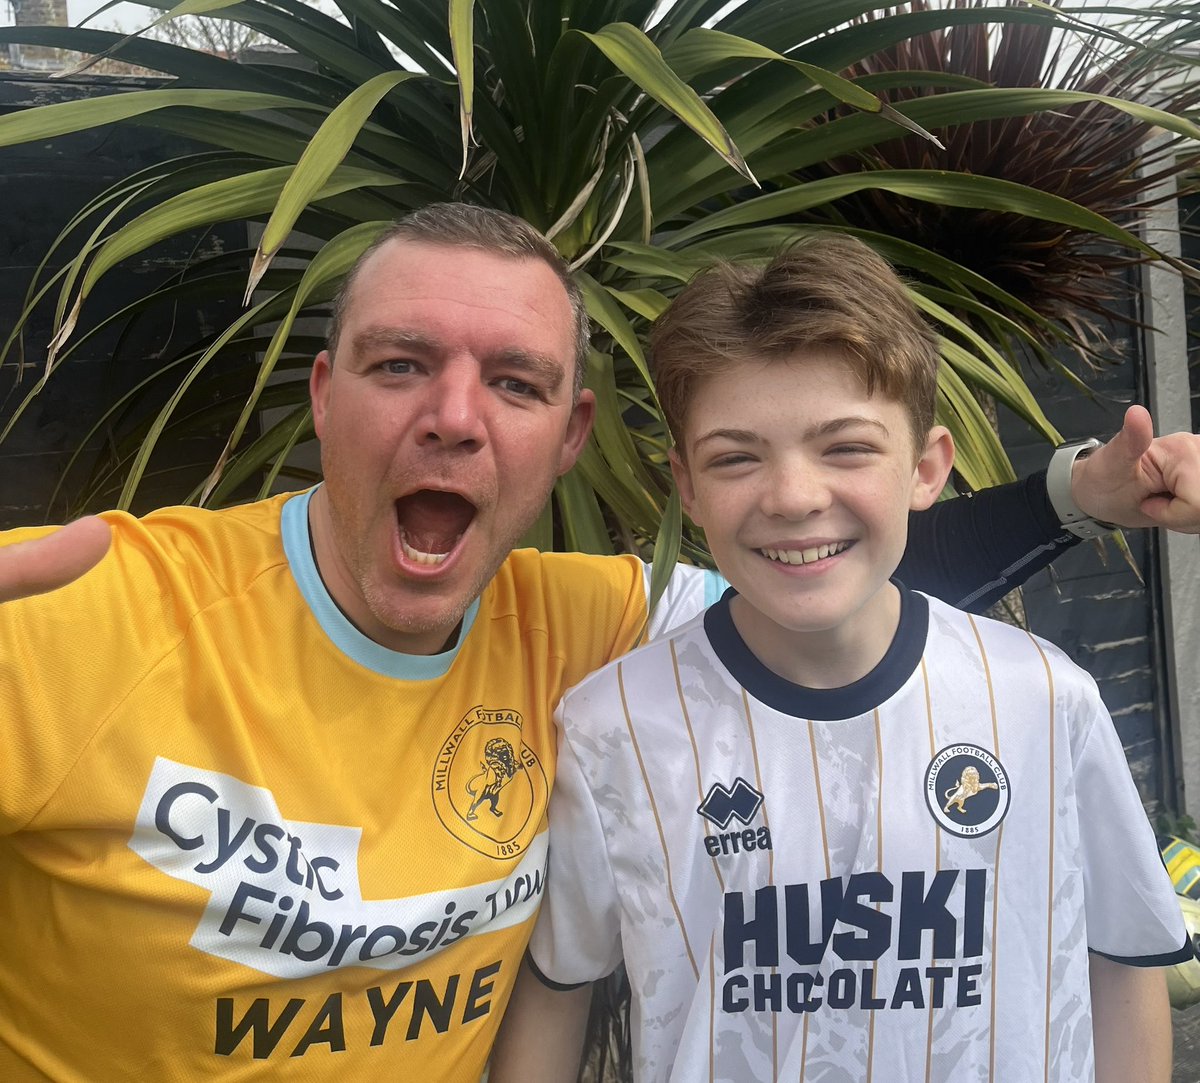 1 day to go, till London marathon 2024. Please help me raise much needed funds and awareness for @cftrust. A condition that my Millwall mad hero lives with 💛🦁 Justgiving.com/page/wayne-sho… #cysticfibrosis #millwallfamily #londonmarathon2024 #reallifehero #milll